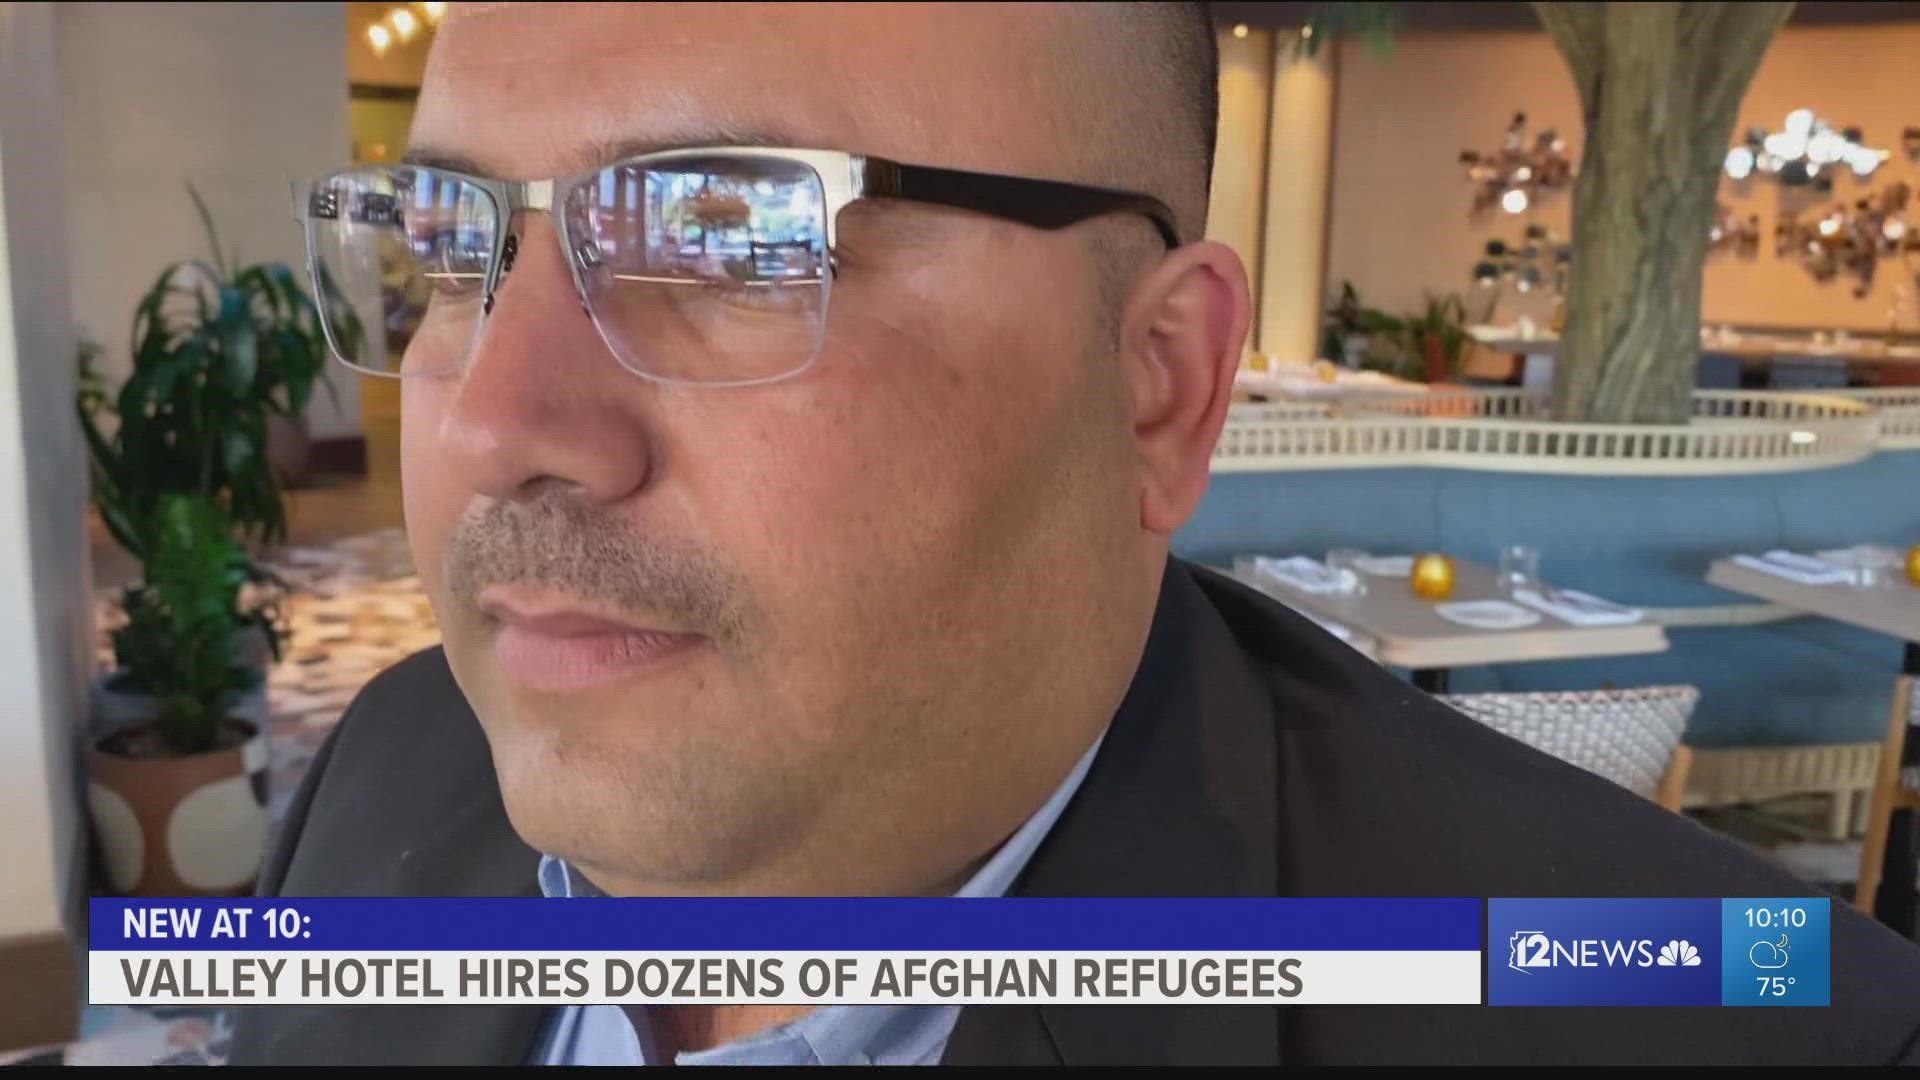 The Sheraton Downtown Phoenix has hired more than three dozen Afghan refugees and they’re looking for more.